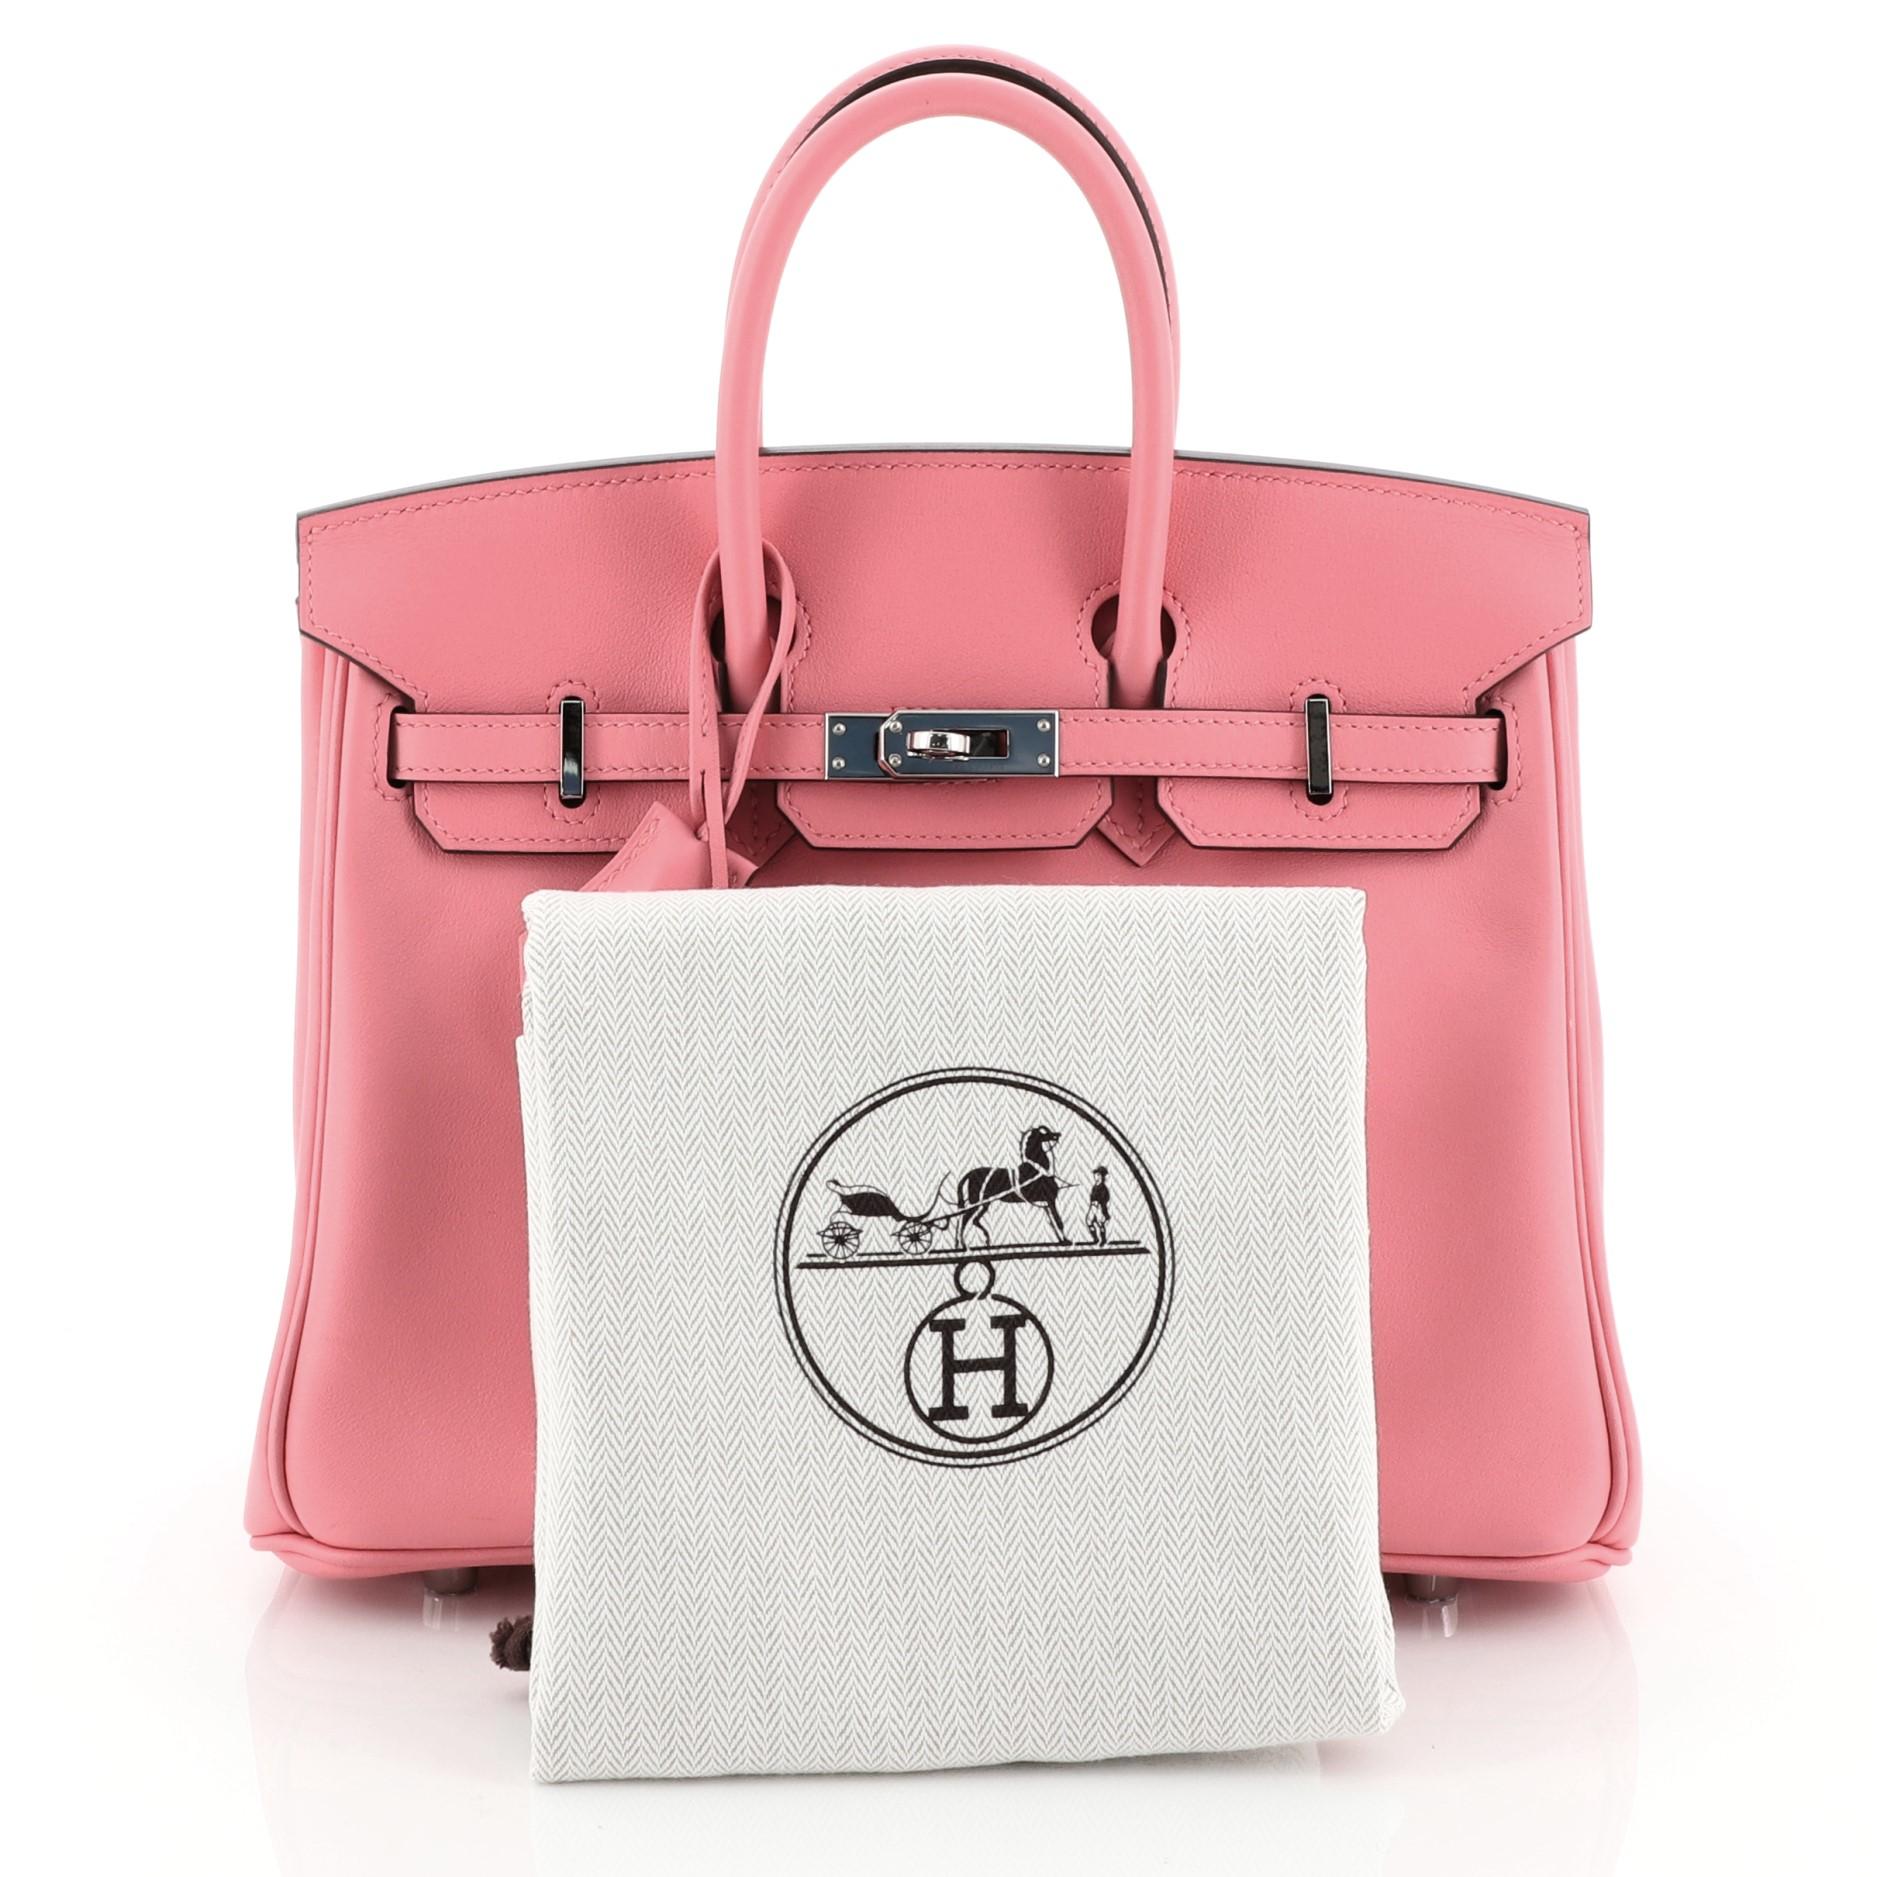 This Hermes Birkin Handbag Rose Azalee Swift with Palladium Hardware 25, crafted in Rose Azalee pink Swift leather, features dual rolled top handles, frontal flap, and palladium hardware. Its turn-lock closure opens to a Rose Azalee pink Swift